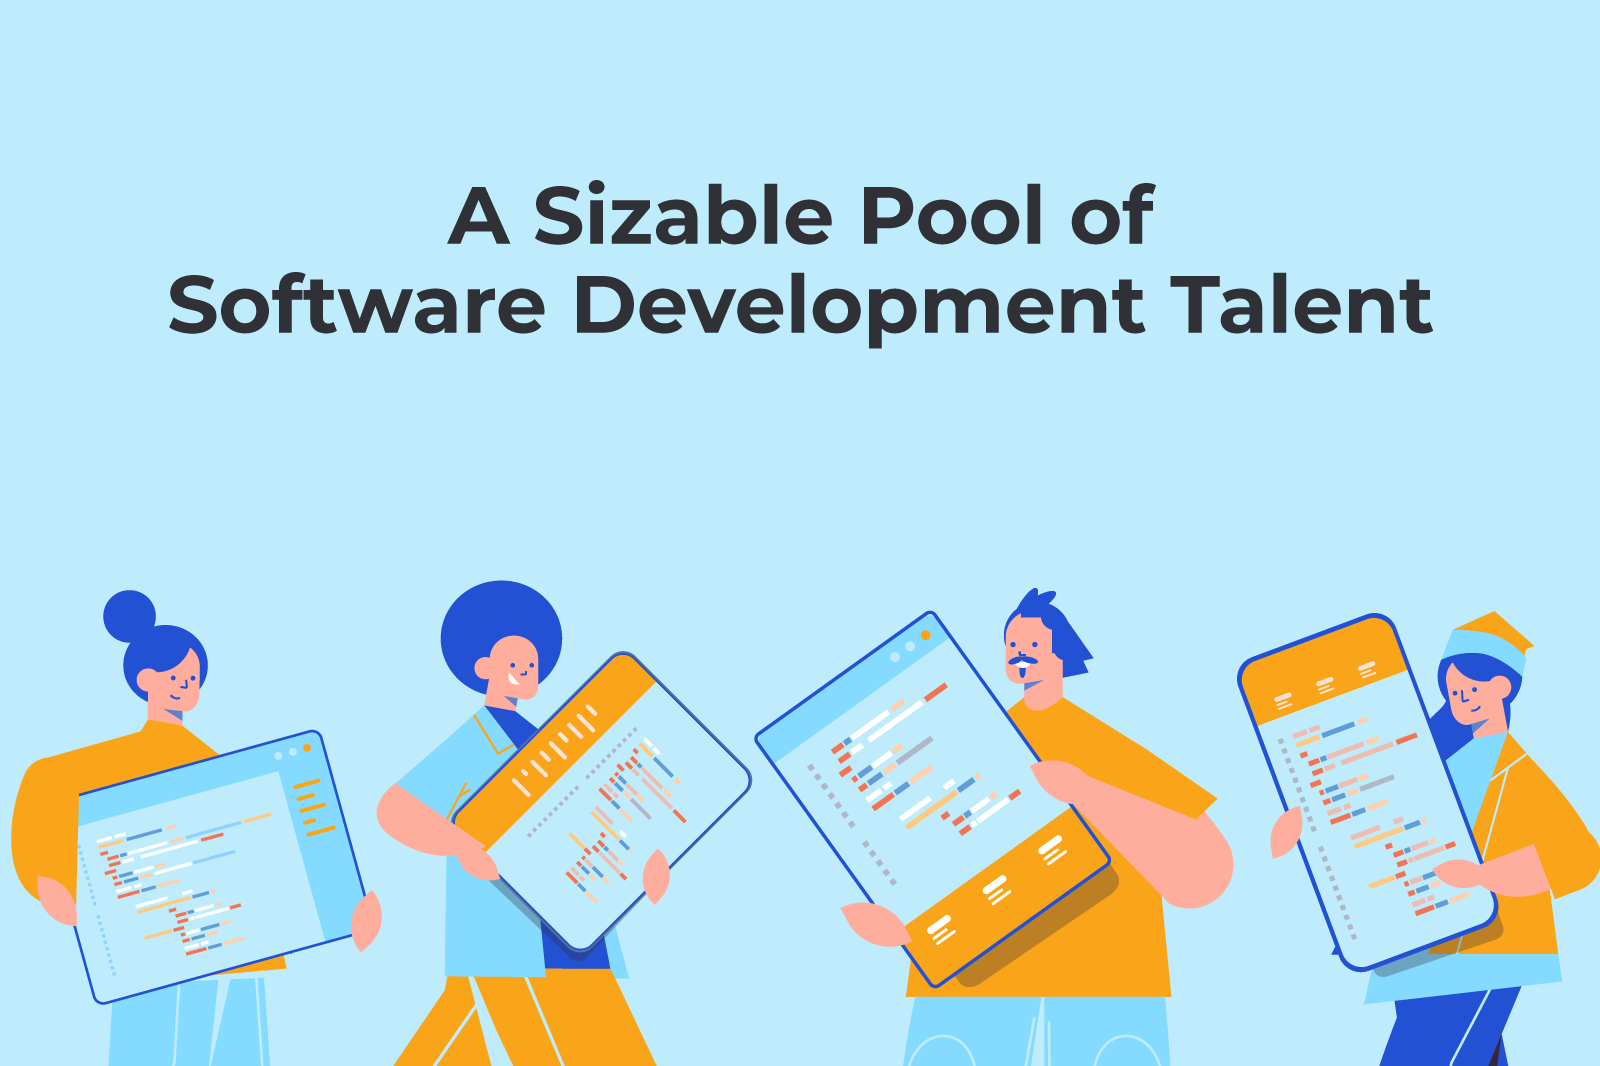 Sizable Pool of Software Development Talent